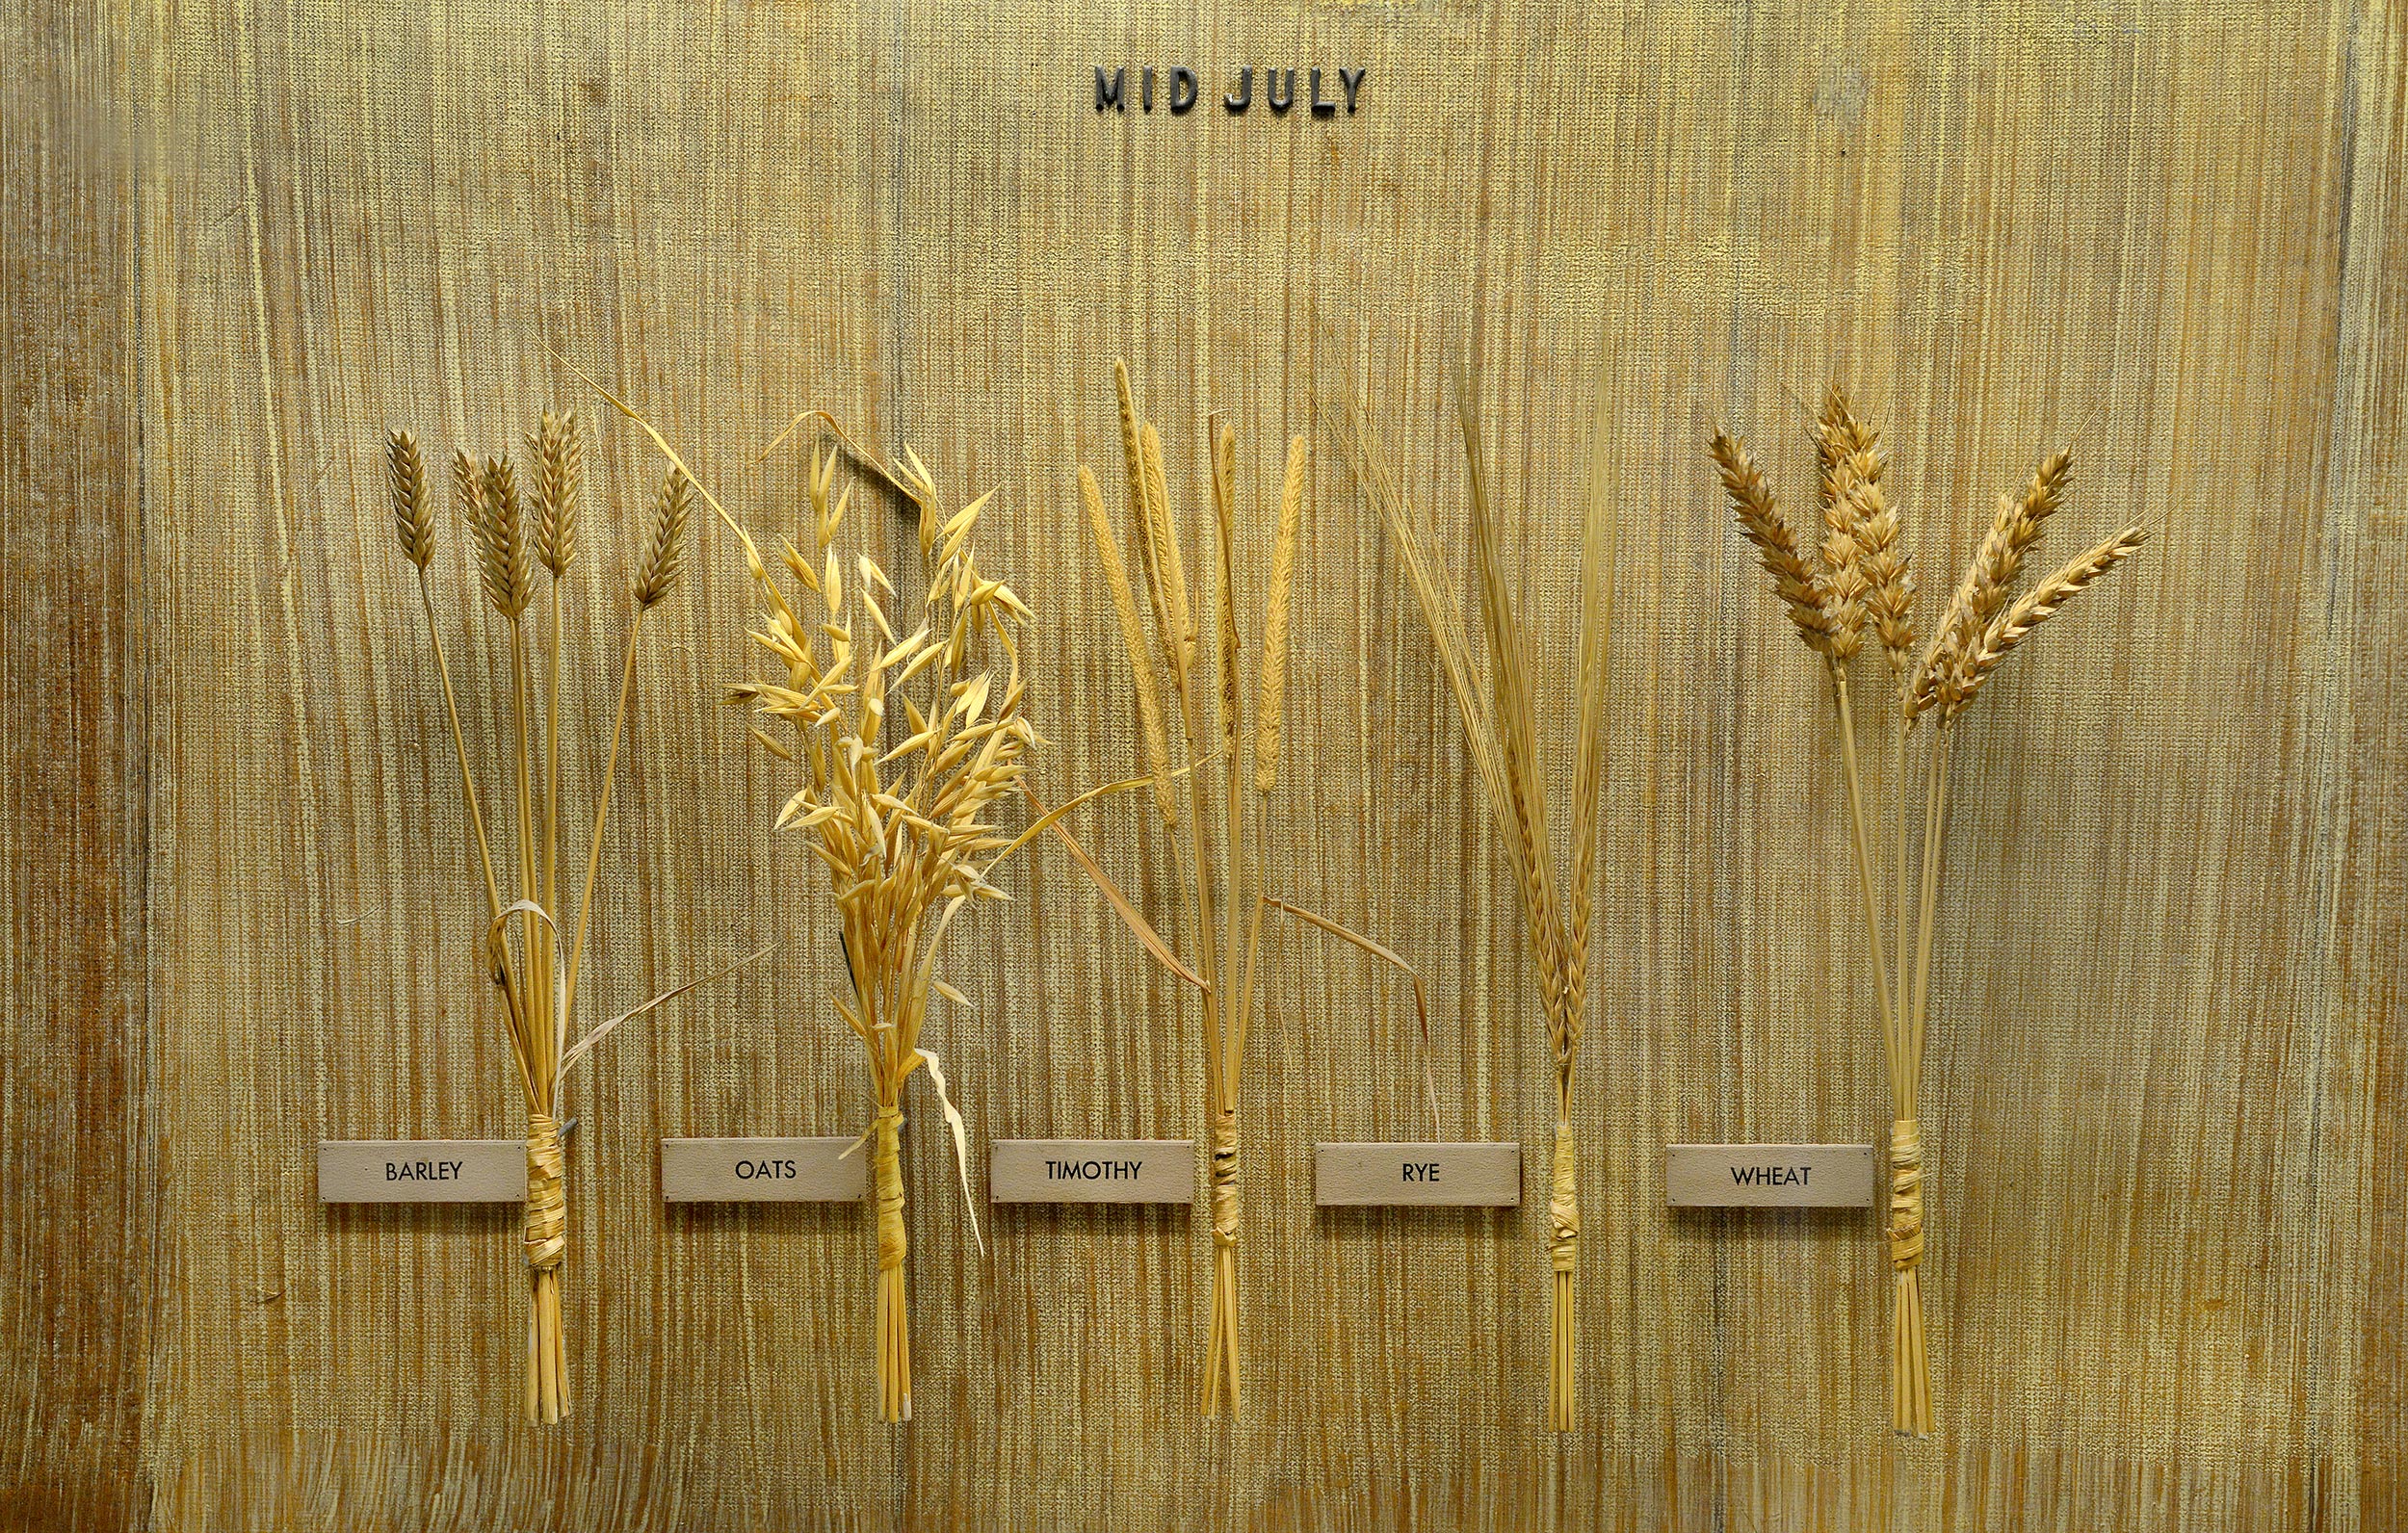 Section of a museum case showing barley, oats and other crops.